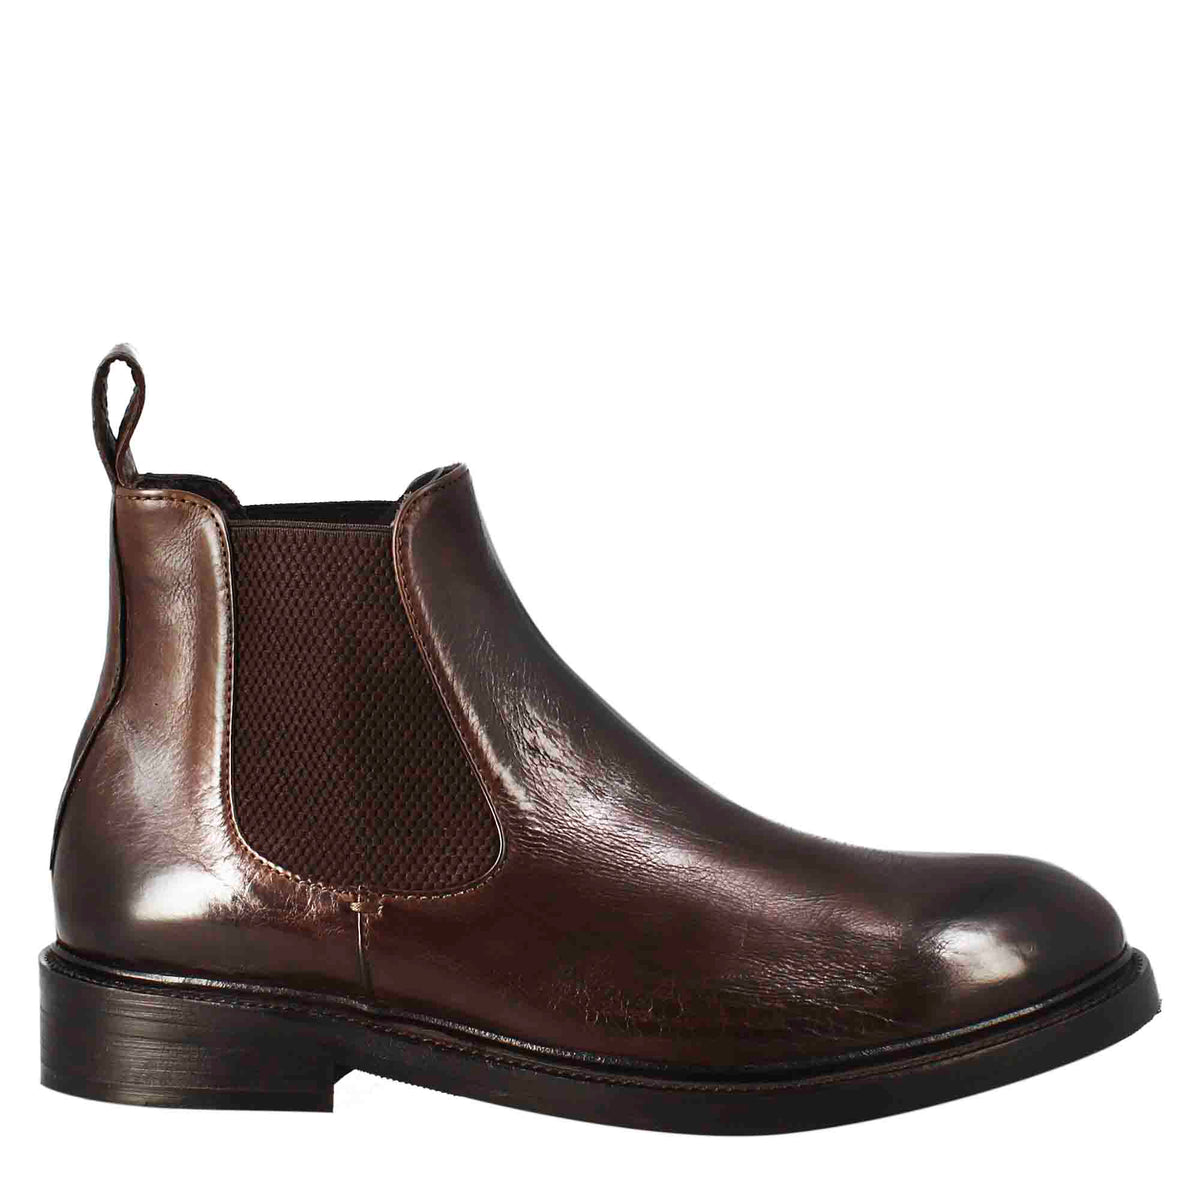 Men's Chelsea Diver boot in dark brown washed leather